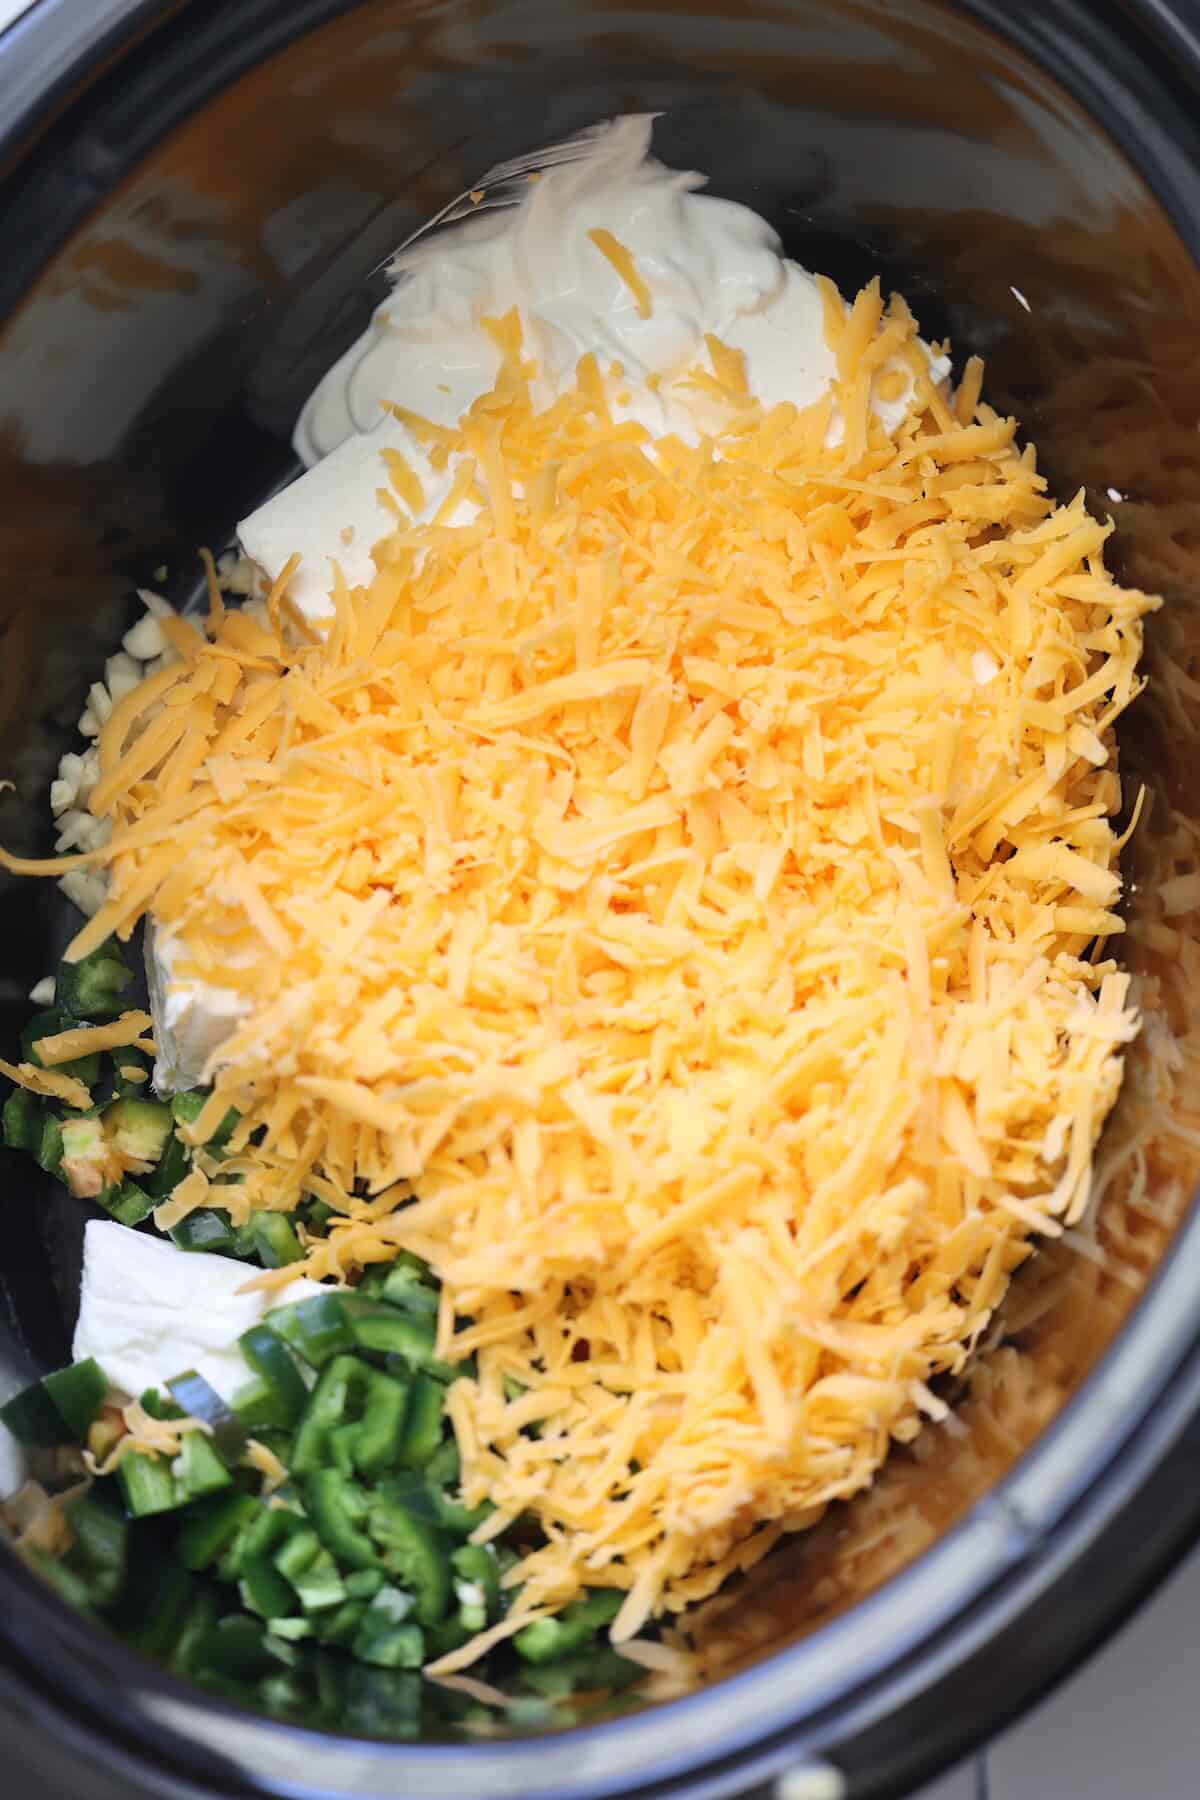 cheddar cheese, sour cream, cream cheese, jalapeno, and garlic in a crockpot